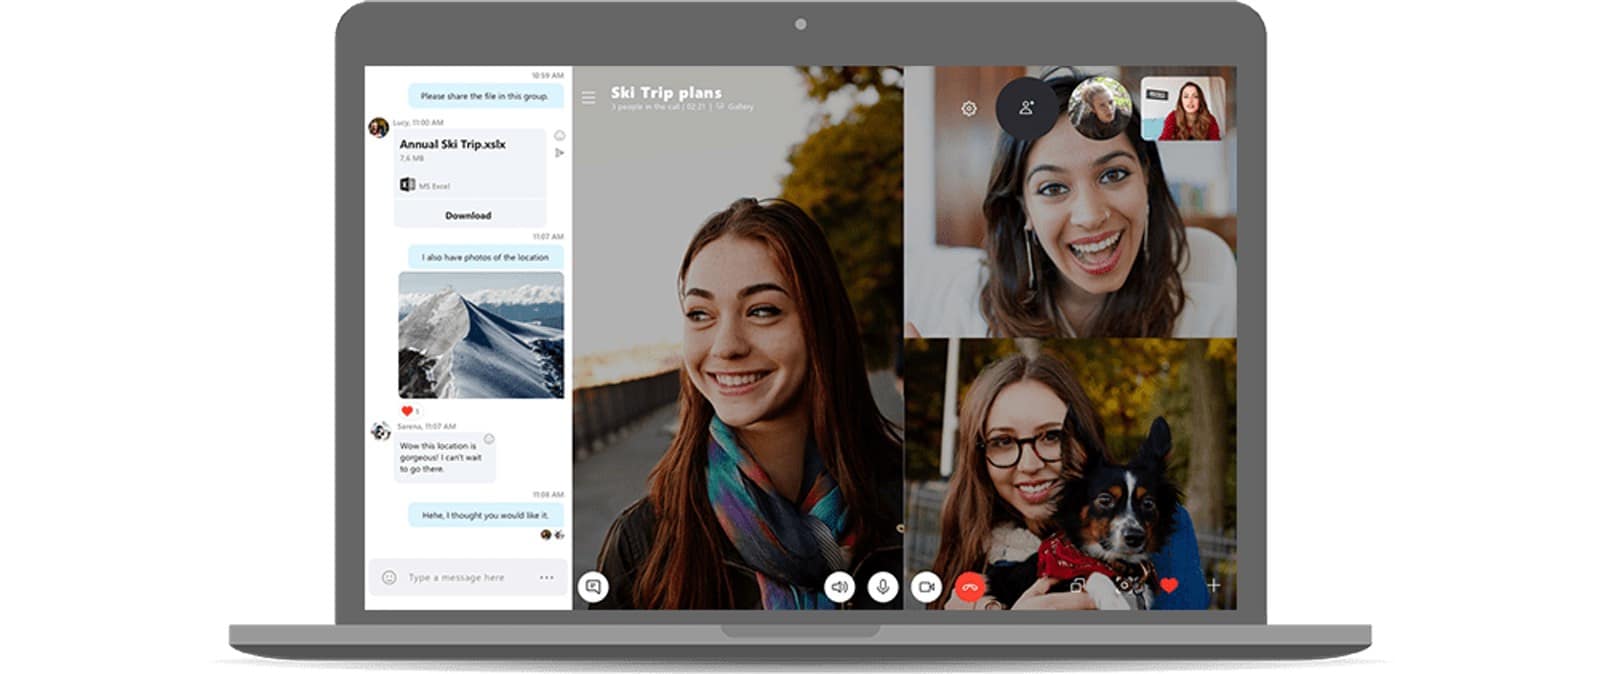 Top Zoom alternatives: Popular even before the coronavirus lockdown, Skype is almost a default option for videoconferencing.